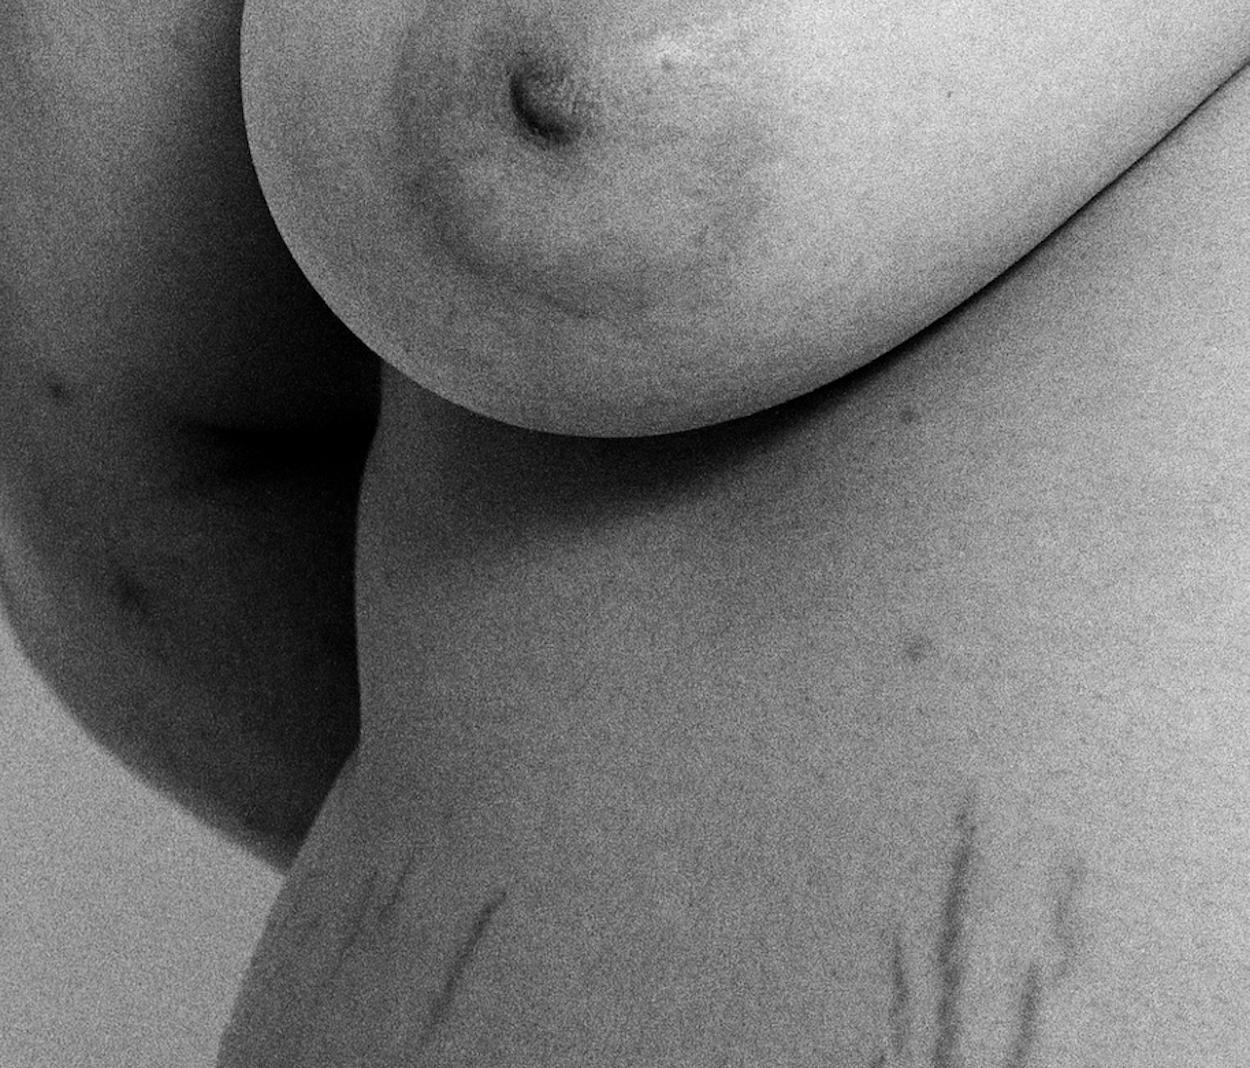 These photographs explore tonality, texture, mass and depth in context of the human figure. 

This photograph was made in studio in Seoul, South Korea.

These figure studies intend to explore and demonstrate the shapes and patterns of the human form